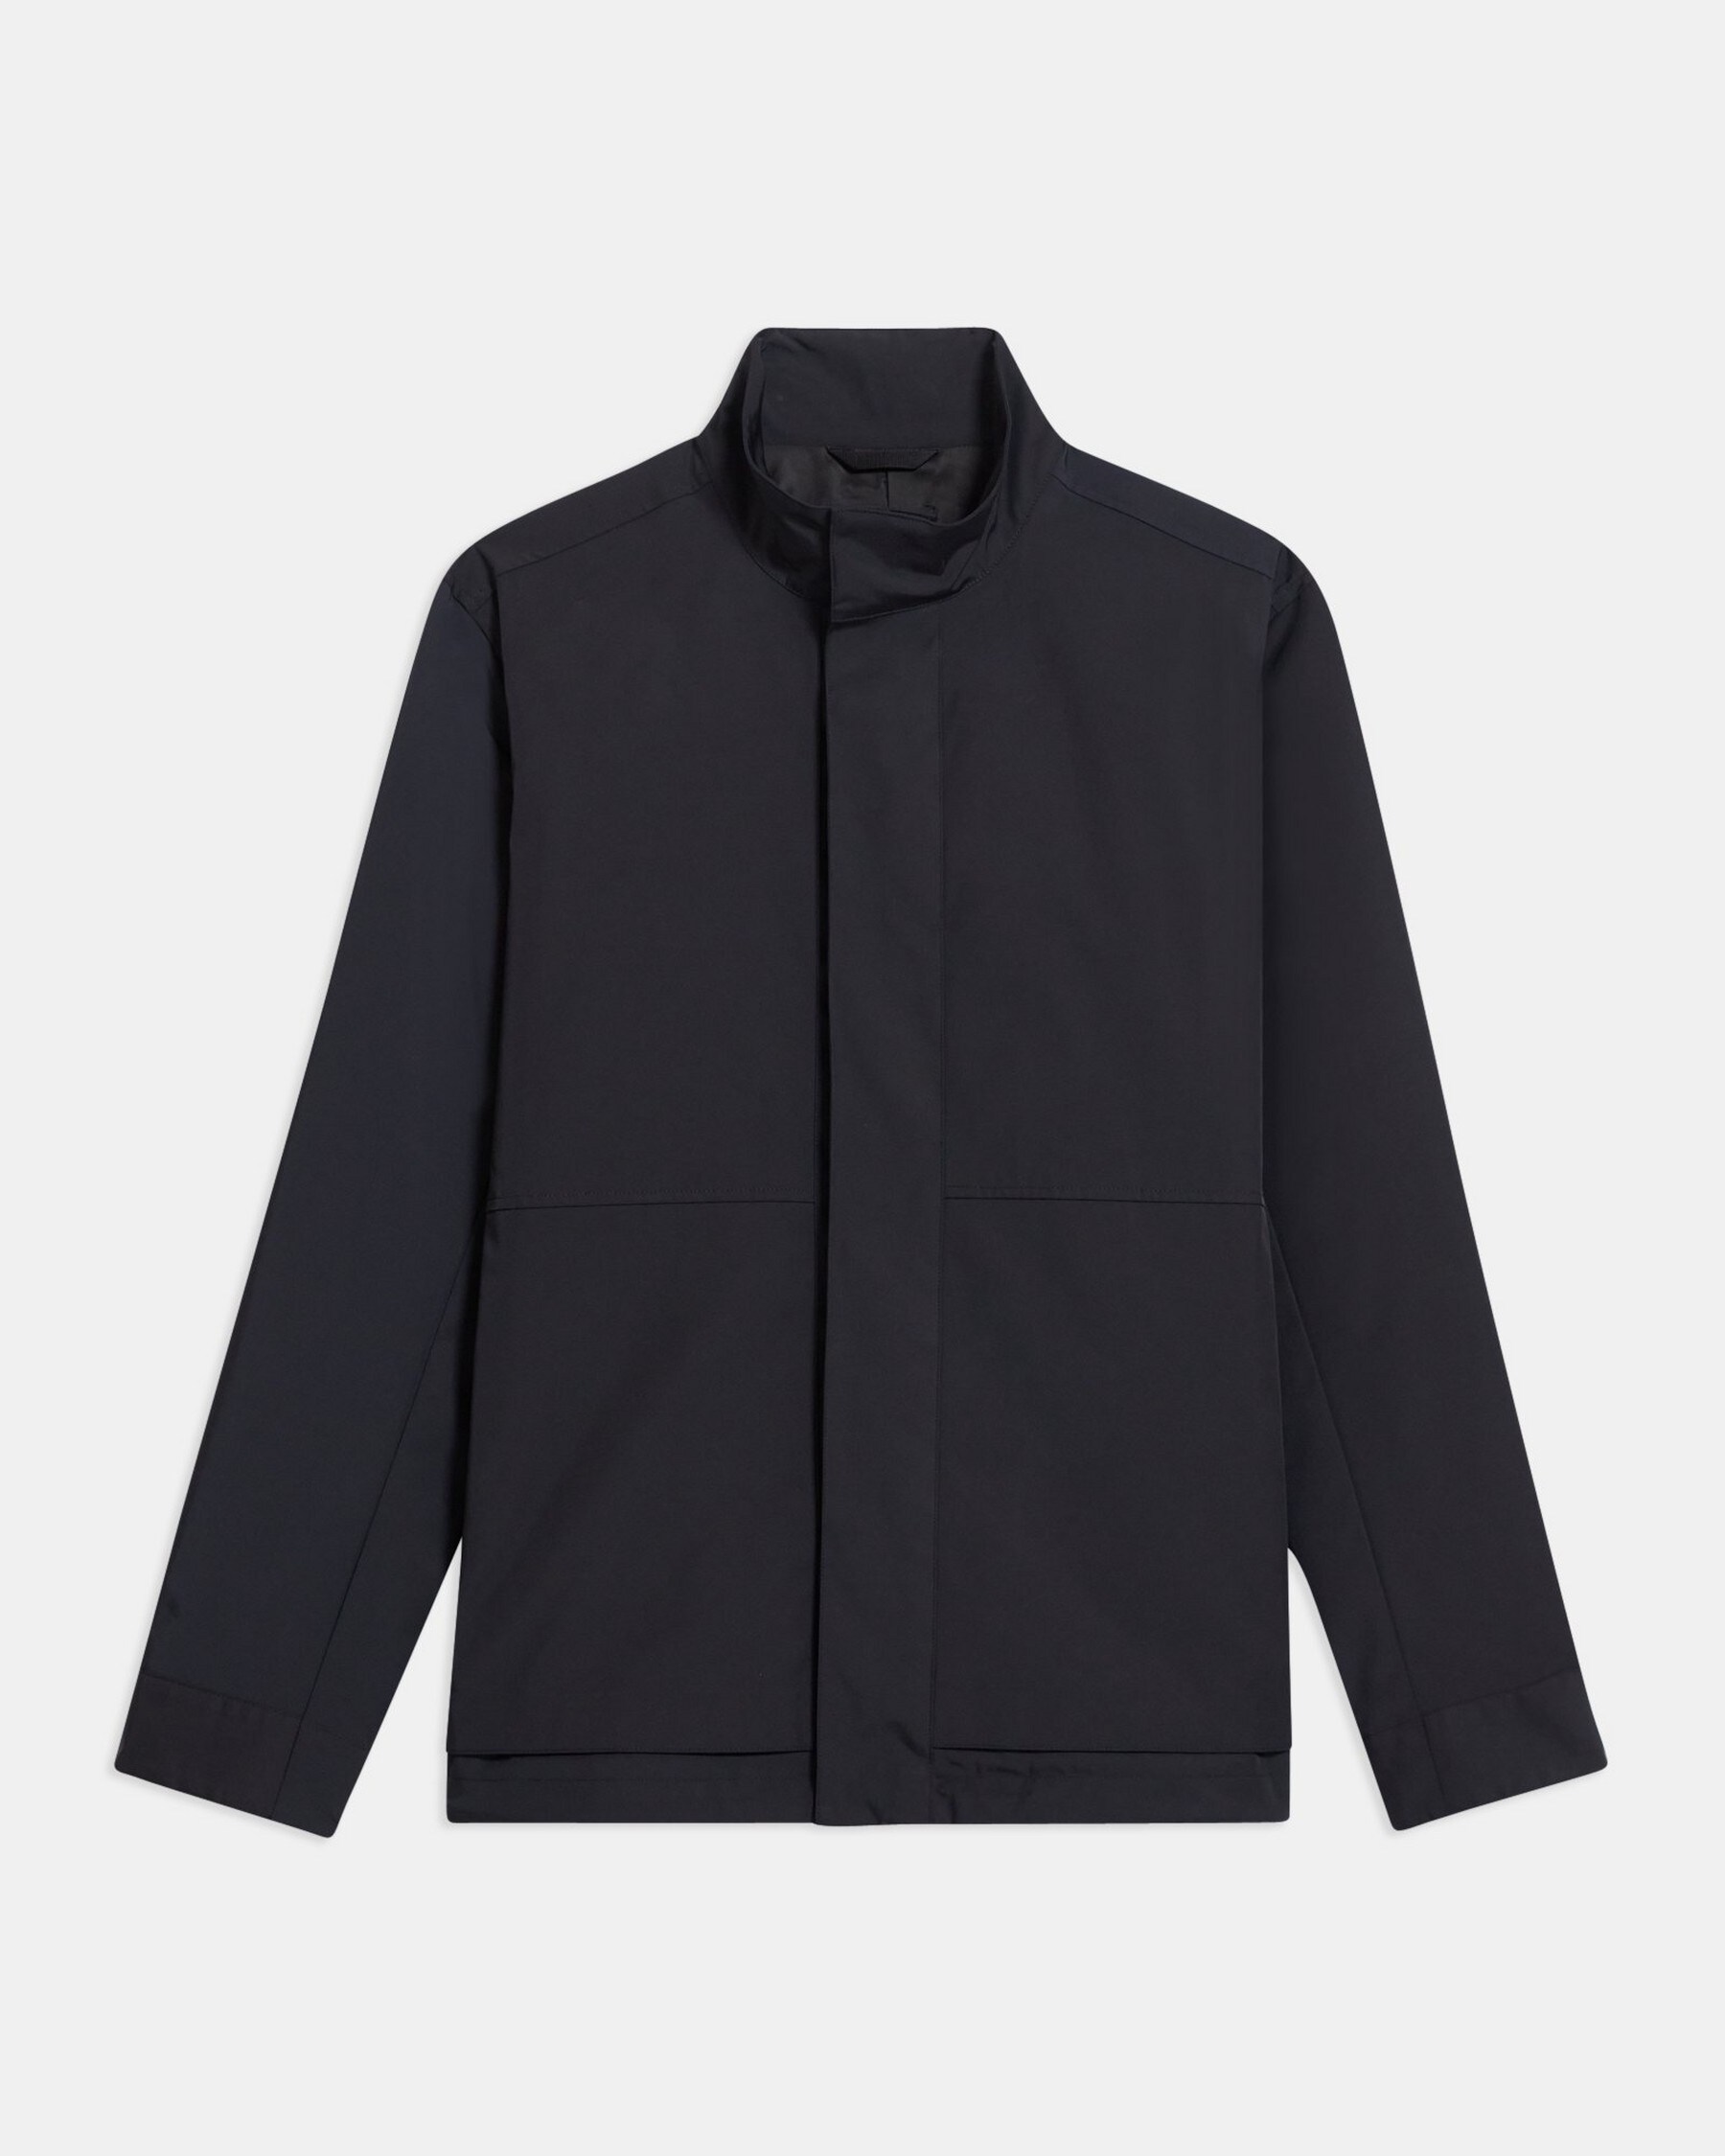 Clarkson Jacket in Water-Resistant Polyester